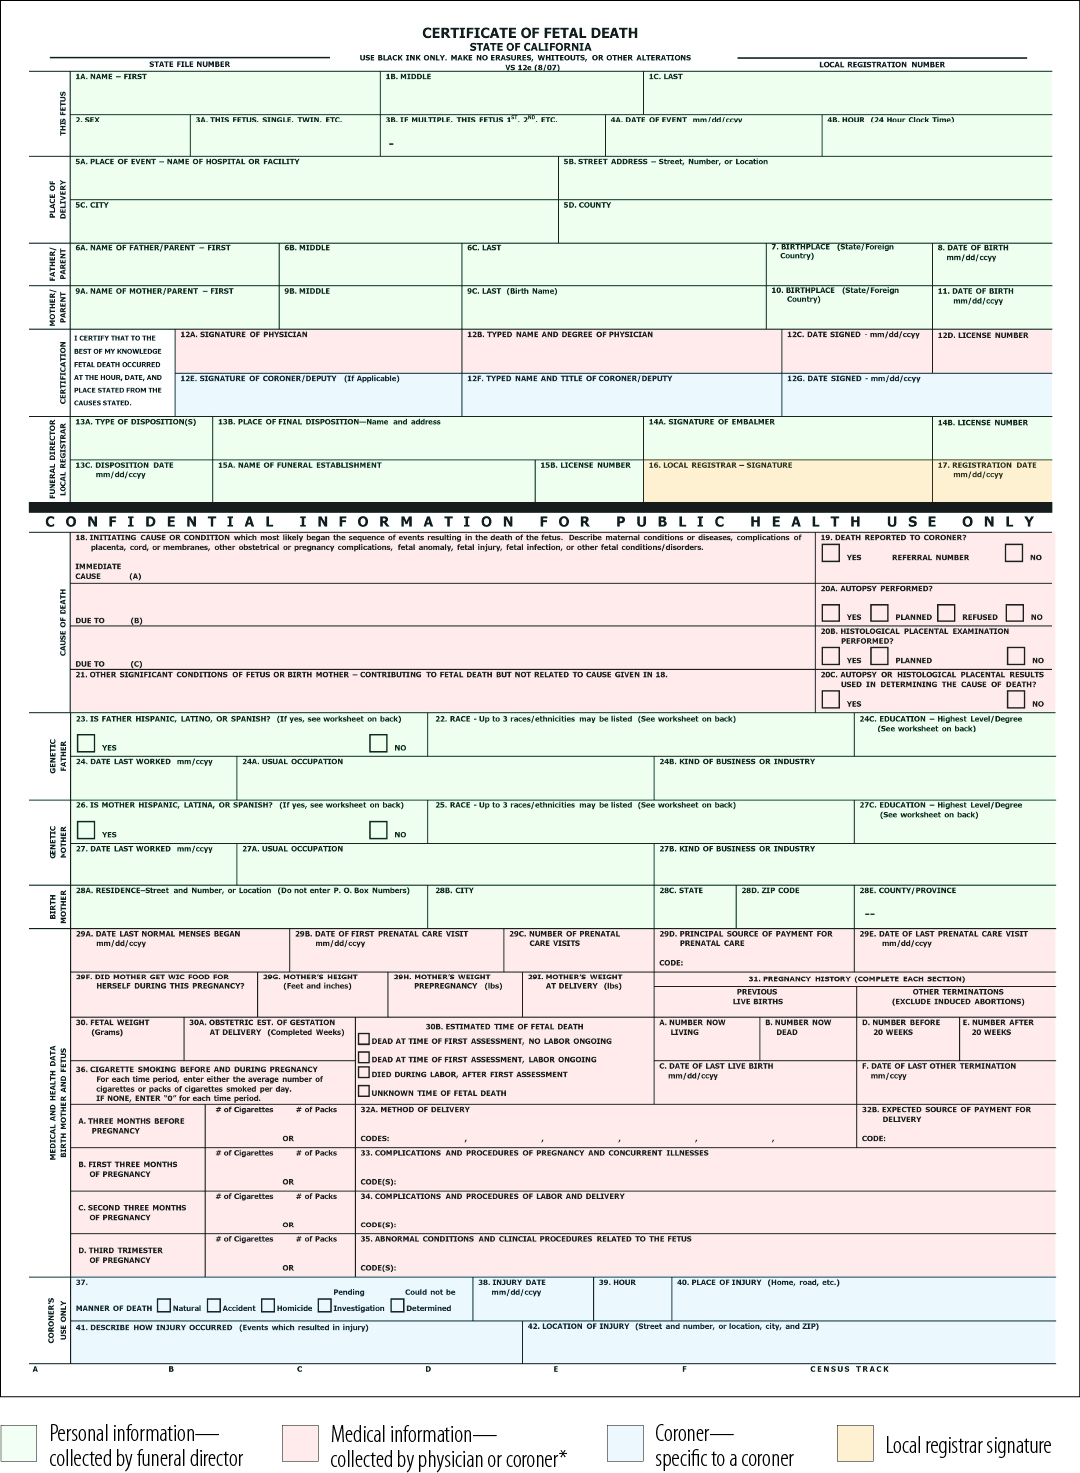 An image of a blank fetal death certificate used by the state to register fetal deaths, with various sections of the certificate shaded to indicate which party is responsible for completing those sections.